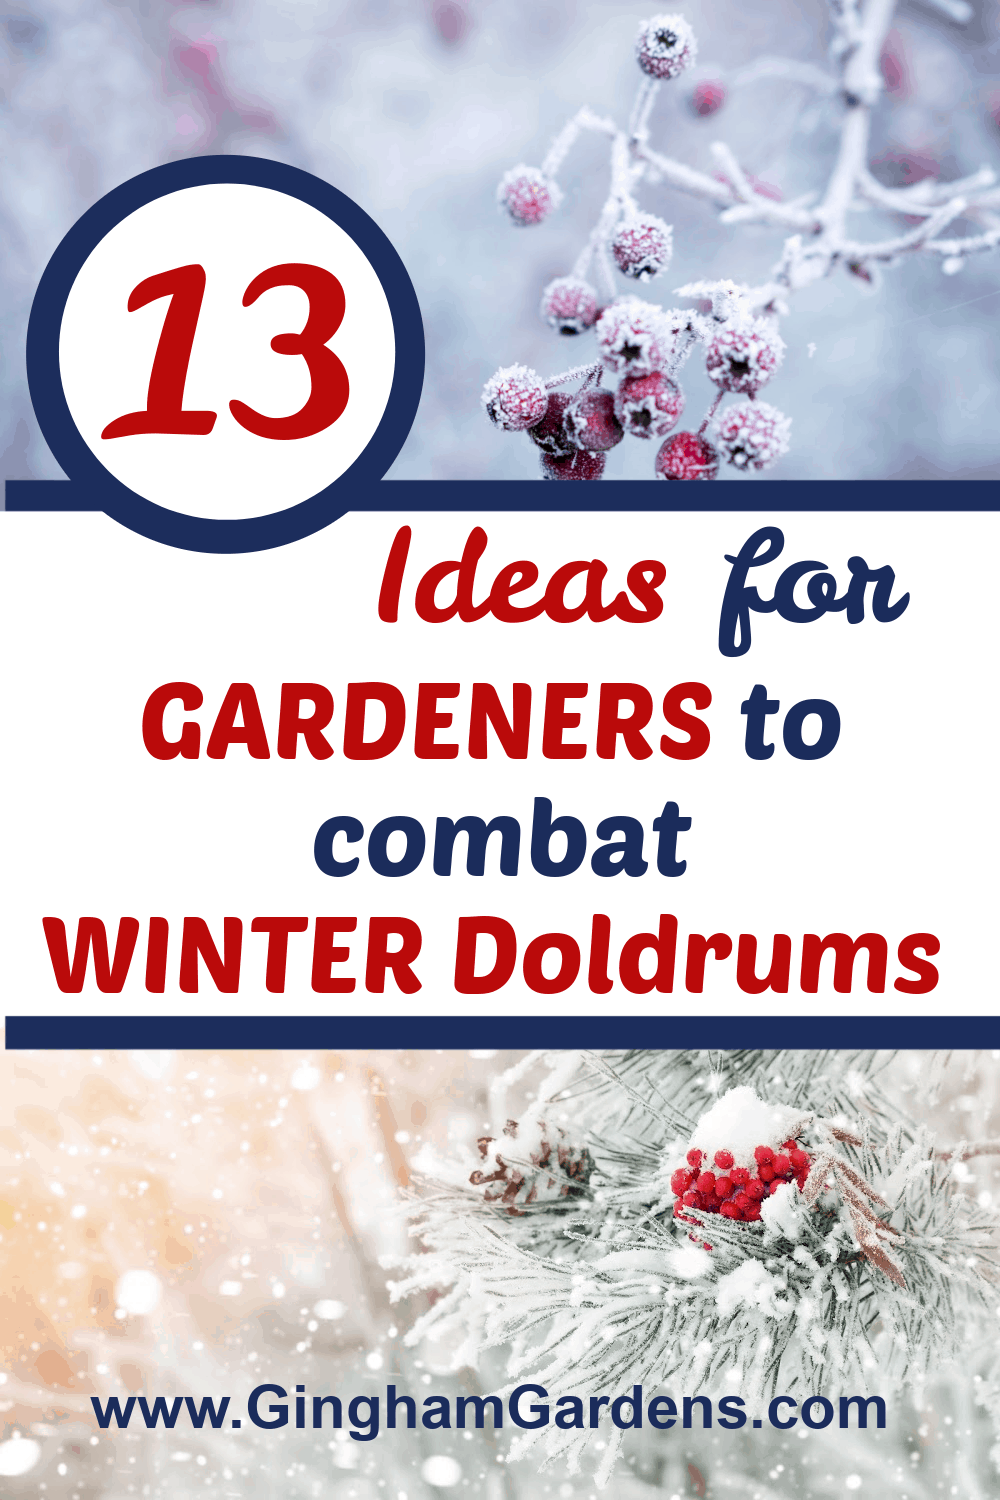 Winter Outdoor Images with Text Overlay - 13 Ideas for Gardeners to combat Winter Doldrums